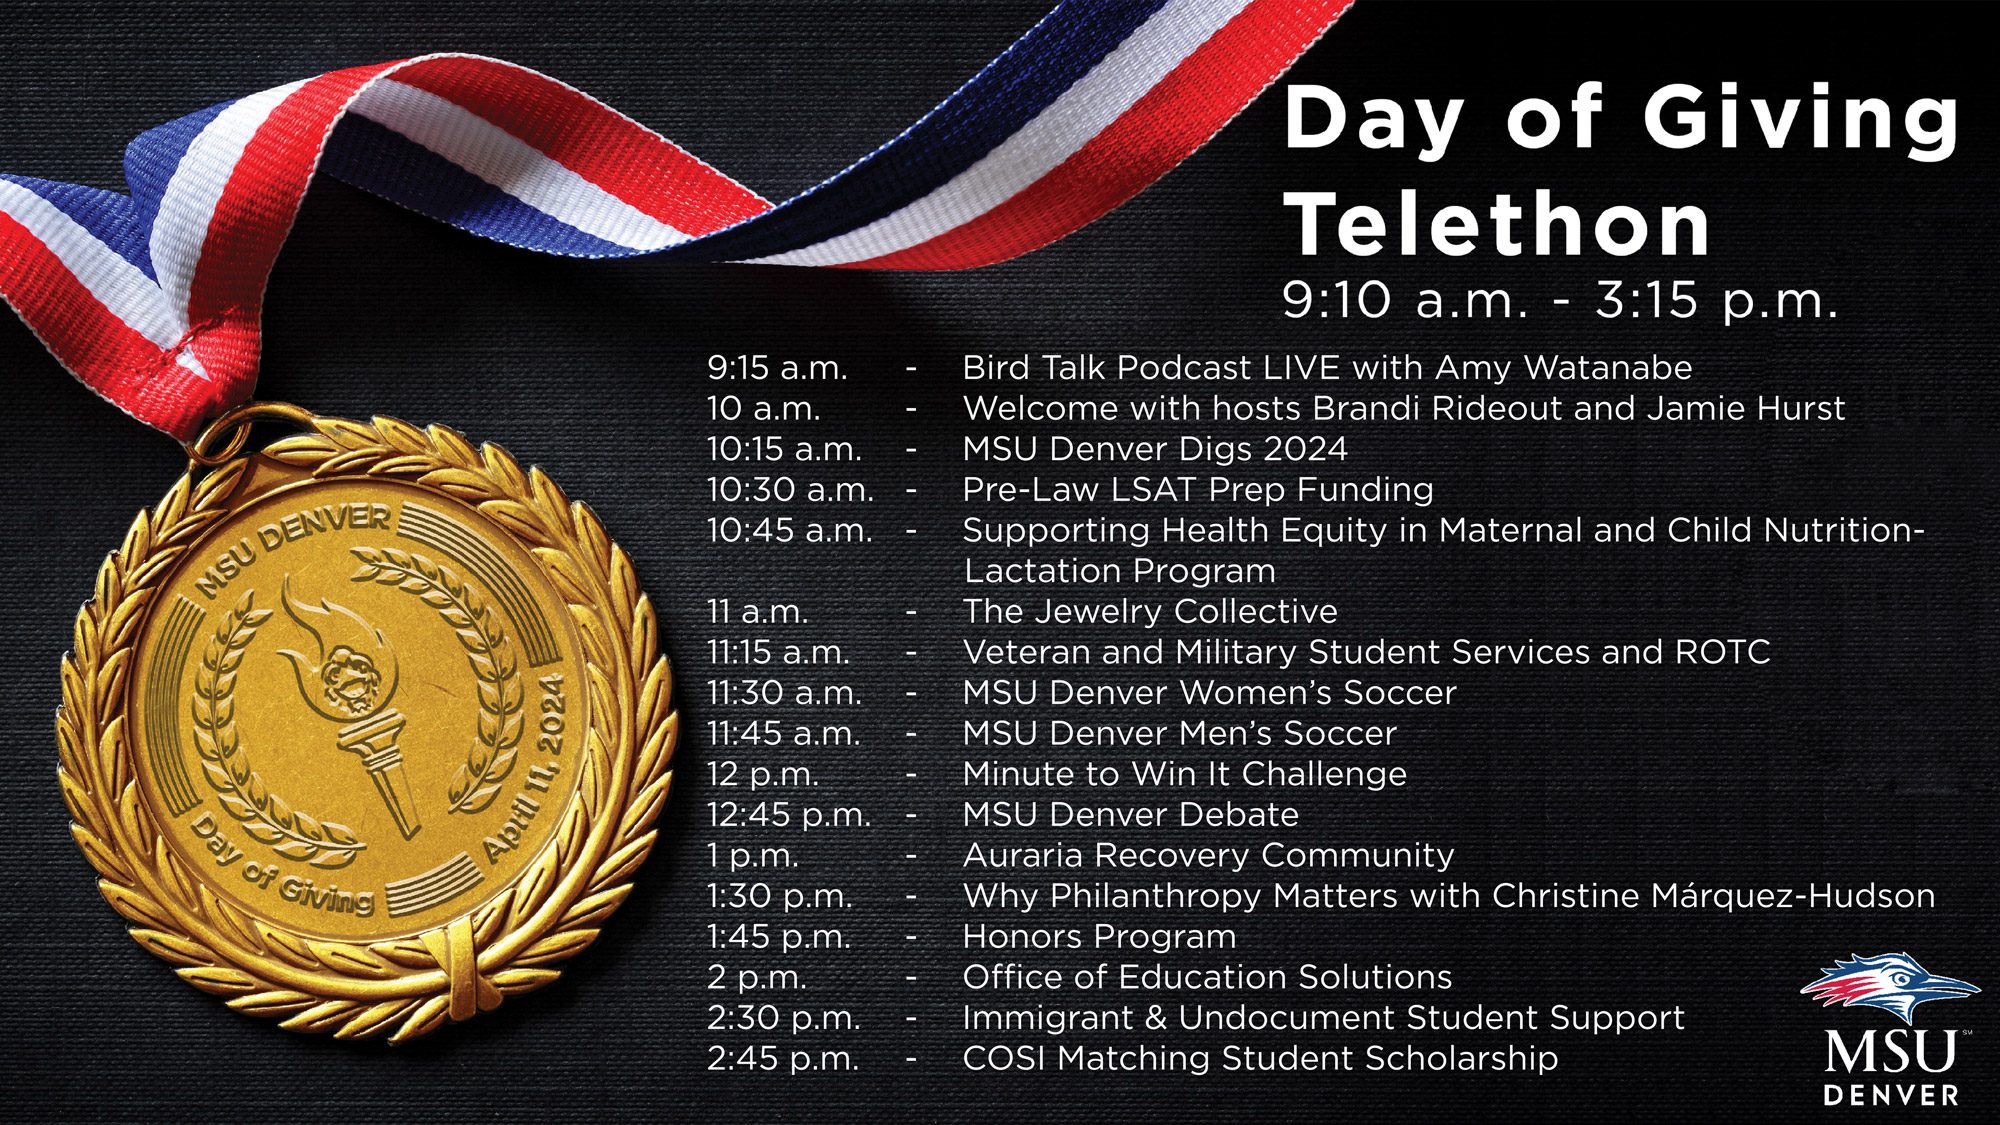 Day of Giving Telethon Schedule: 9:15 a.m. - Bird Talk Podcast LIVE with Amy Watanabe 10 a.m. - Welcome with hosts Brandi Rideout and Jamie Hurst 10:15 a.m. - MSU Denver Digs 2024 10:30 a.m. - Pre-Law LSAT Prep Funding 10:45 a.m. - Supporting Health Equity in Maternal and Child Nutrition-Lactation Program 11 a.m. - The Jewelry Collective 11:15 a.m. - Veteran and Military Student Services and ROTC 11:30 a.m. - MSU Denver Women’s Soccer 11:45 a.m. - MSU Denver Men’s Soccer 12 p.m. - Minute to Win It Challenge 12:45 p.m. - MSU Denver Debate 1 p.m. - Auraria Recovery Community 1:30 p.m. - Why Philanthropy Matters with Christine Márquez-Hudson 1:45 p.m. - Honors Program 2 p.m. - Office of Education Solutions 2:30 p.m. - Immigrant & Undocument Student Support 2:45 p.m. - COSI Matching Student Scholarship